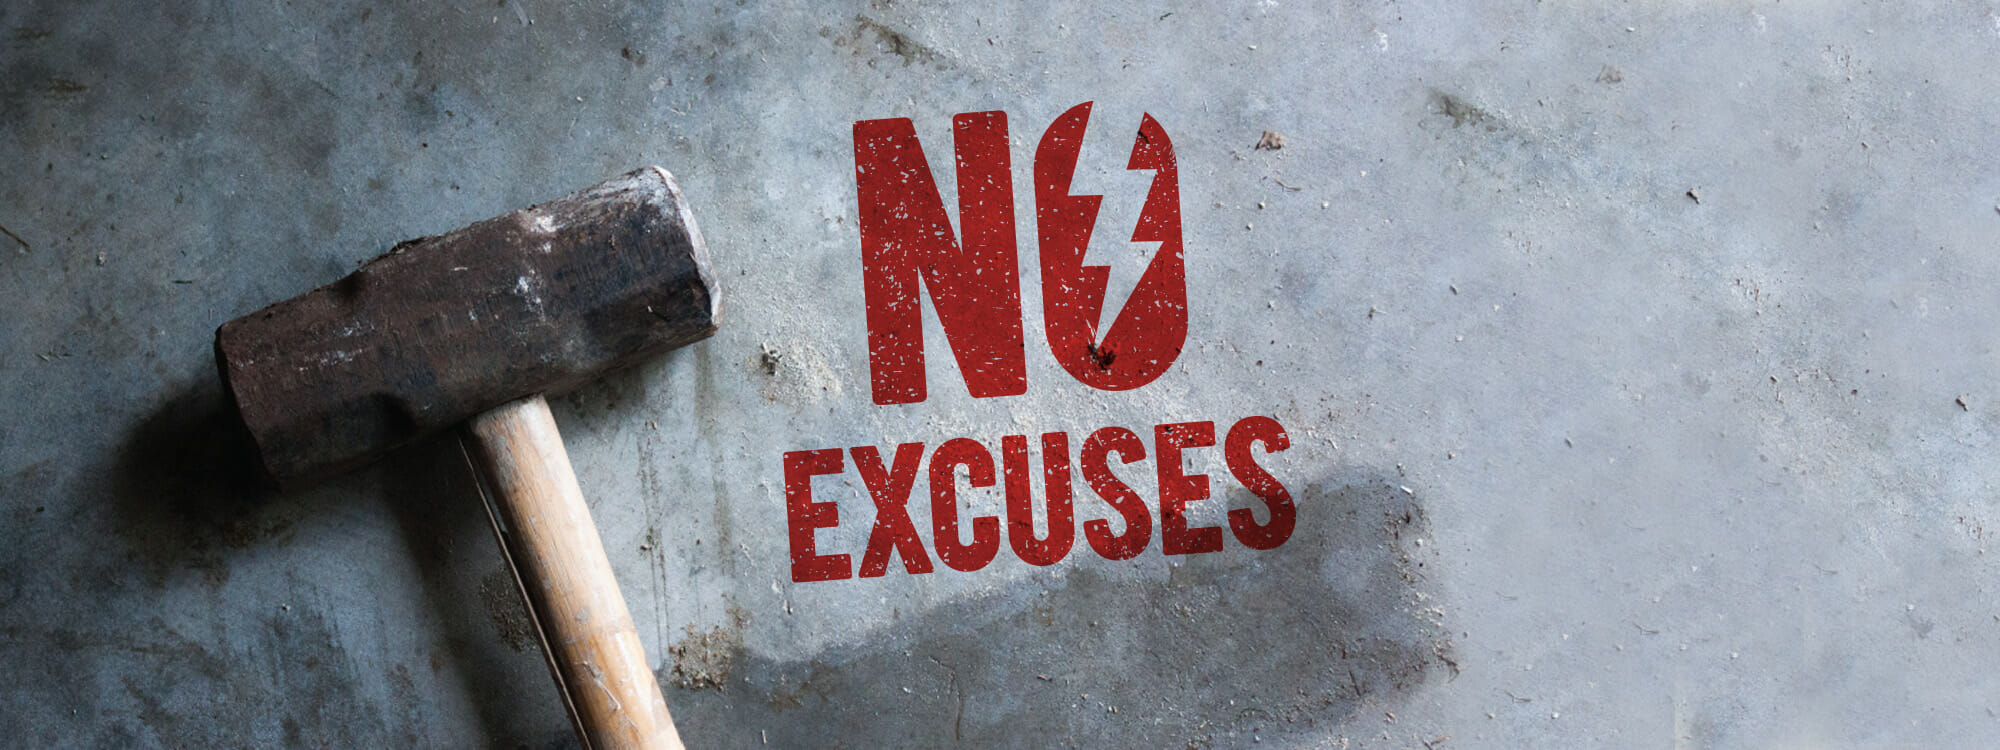 5 Excuses for NOT taking an Executive Education program SMASHED